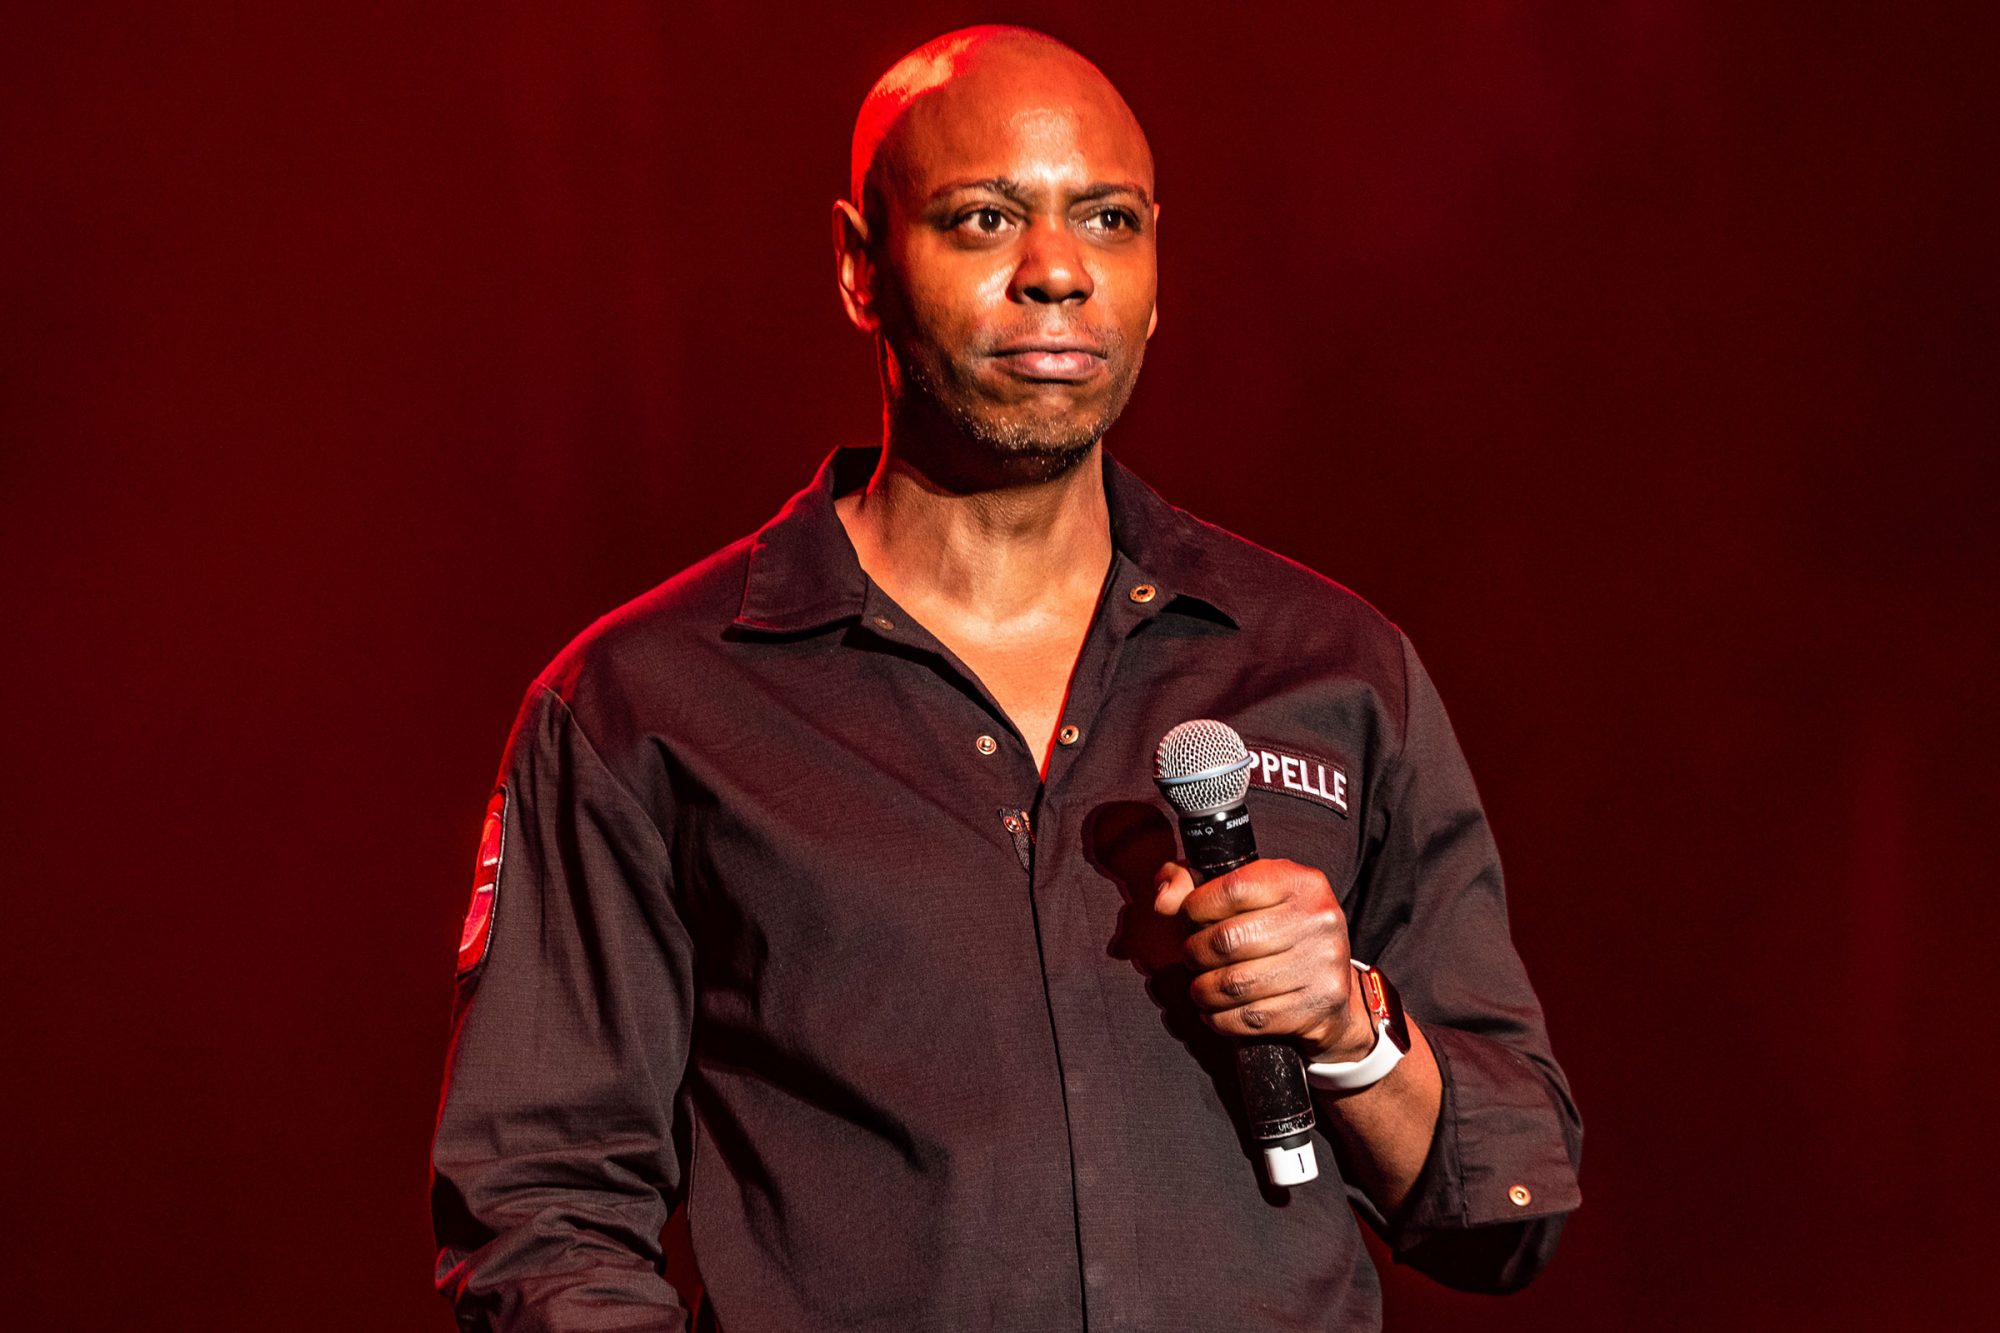 Dave Chappelle Wiki, Bio, Age, Net Worth, and Other Facts - FactsFive.